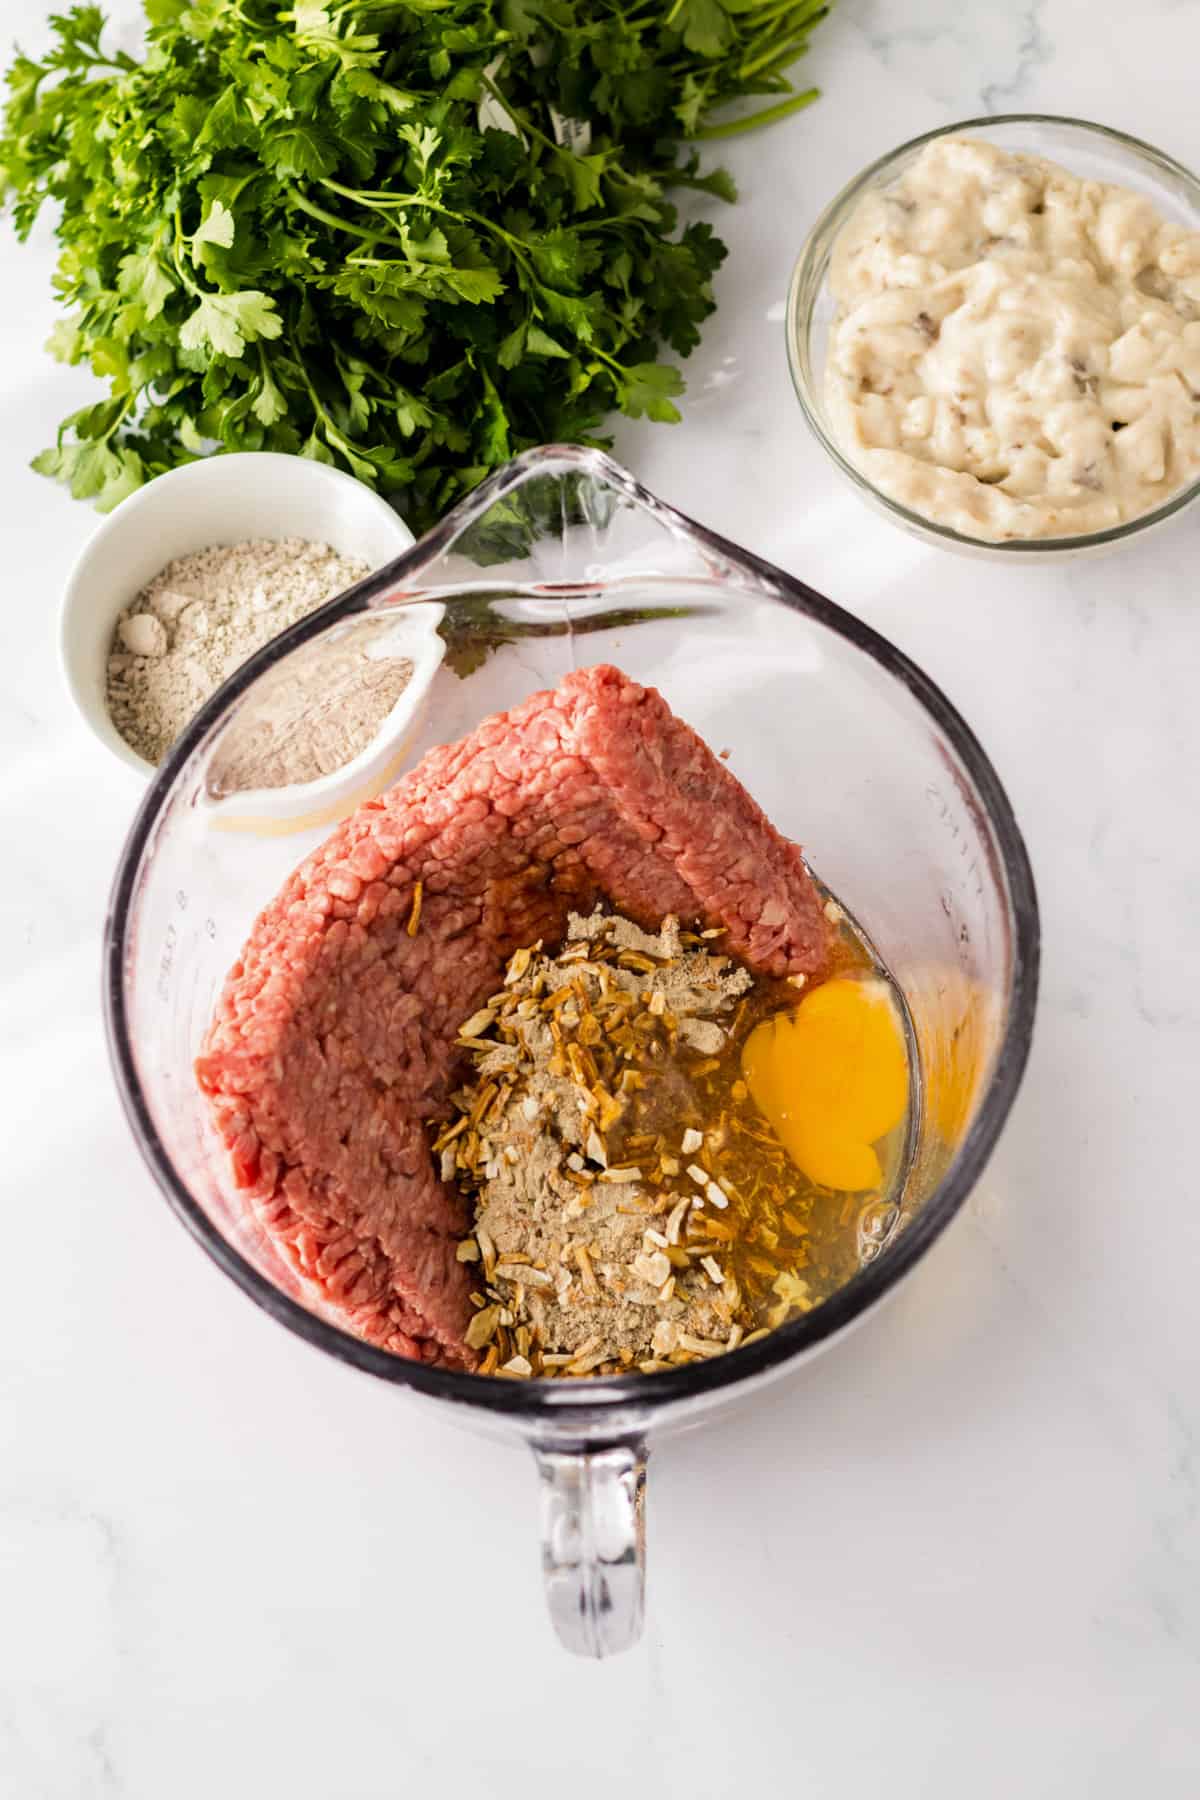 Ground beef, onion soup mix, egg, bread crumbs, worcestershire sauce, and steak seasoning in a large measuring cup.